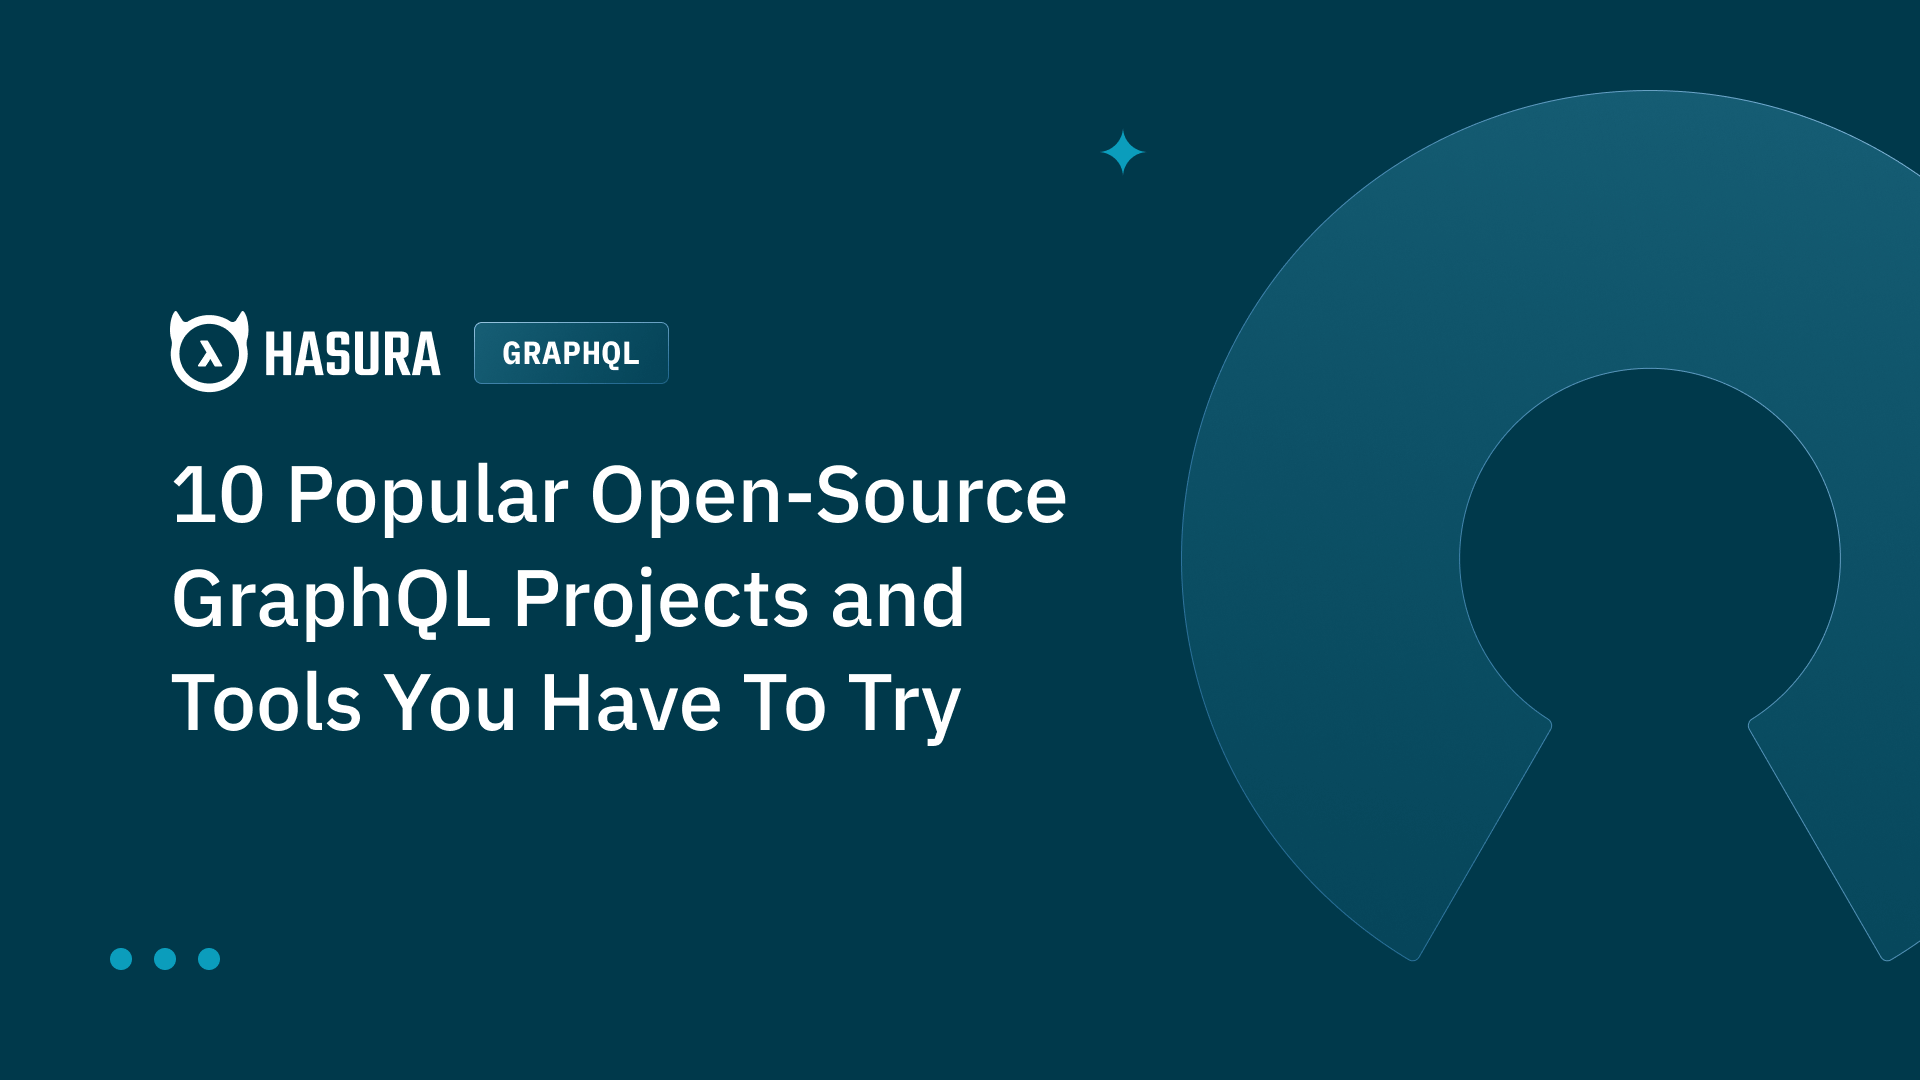 10 Popular Open-Source GraphQL Projects and Tools You Have To Try